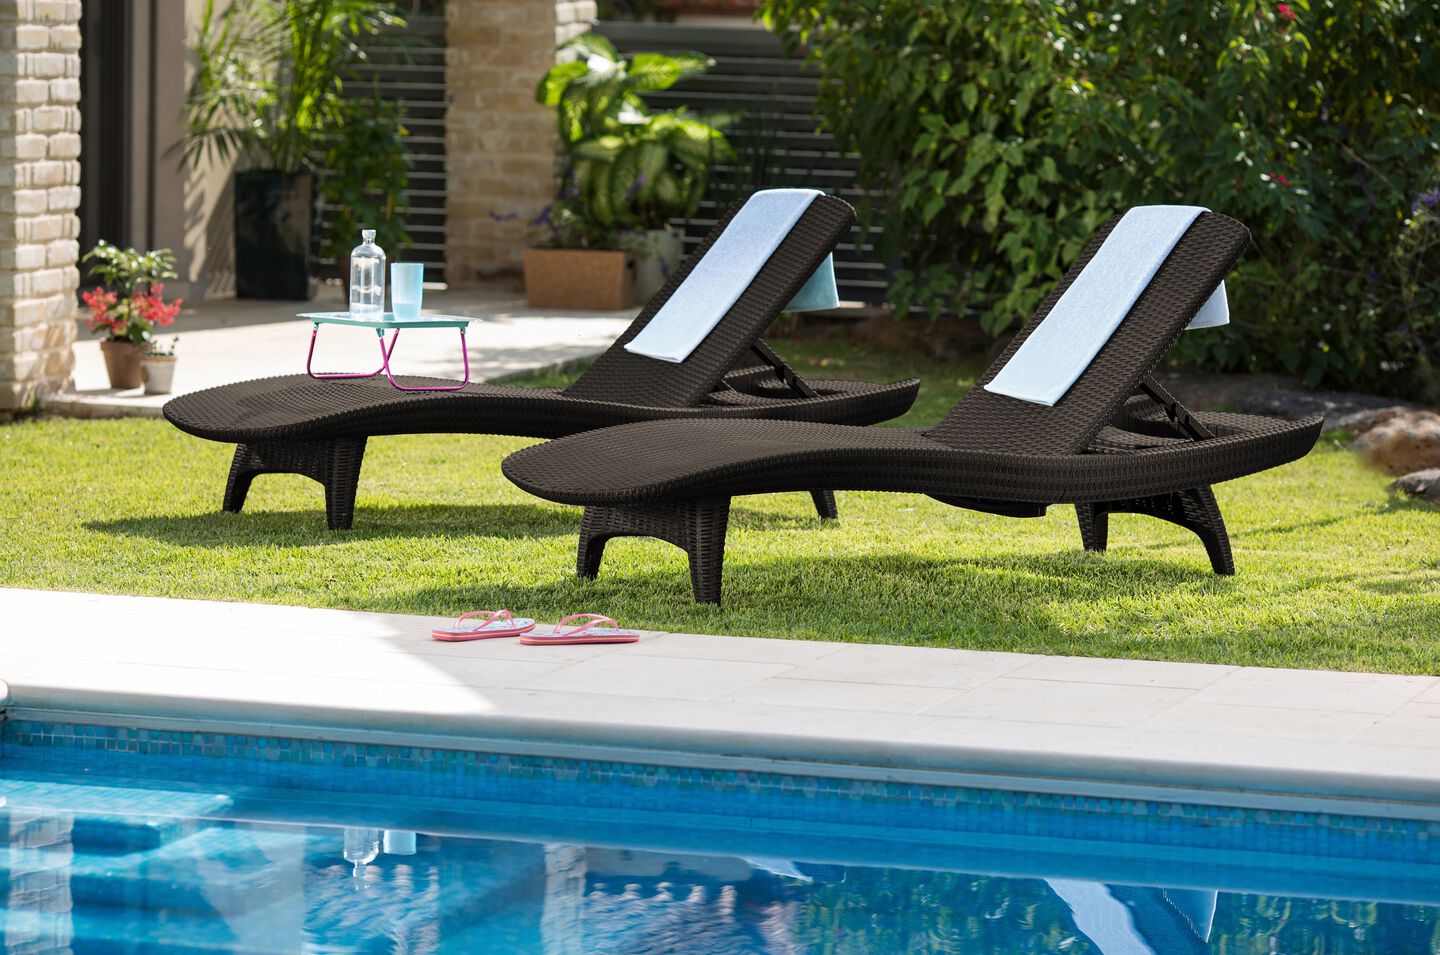 Pair of brown sun loungers next to the pool